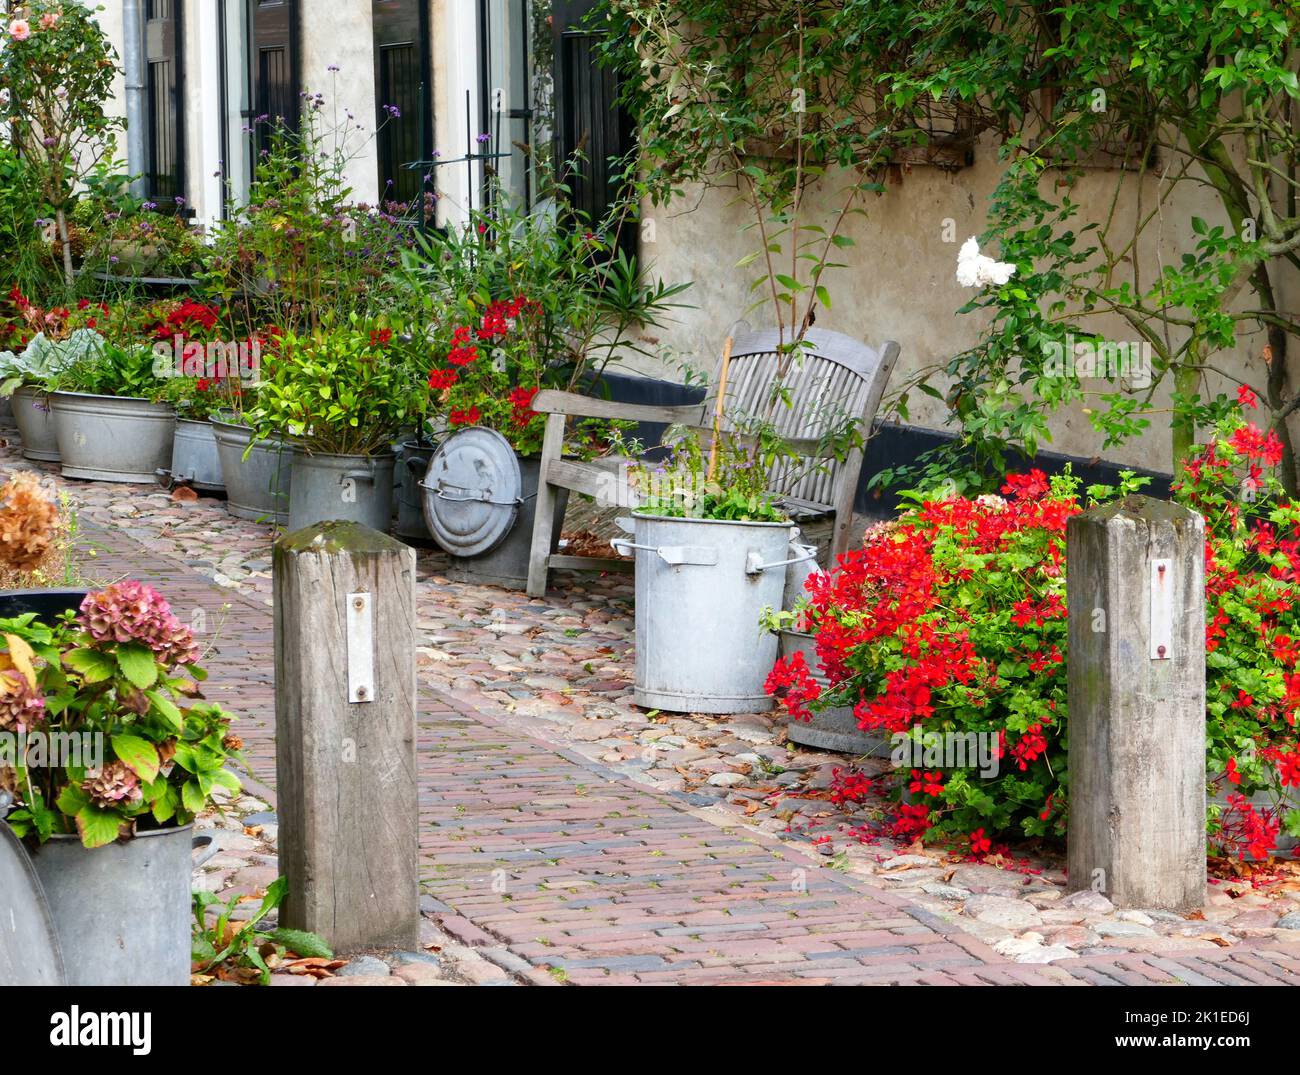 Small street near to the fortified wall with flowers in pots and buckets in the center of Elburg in the Netherlands. Stock Photo